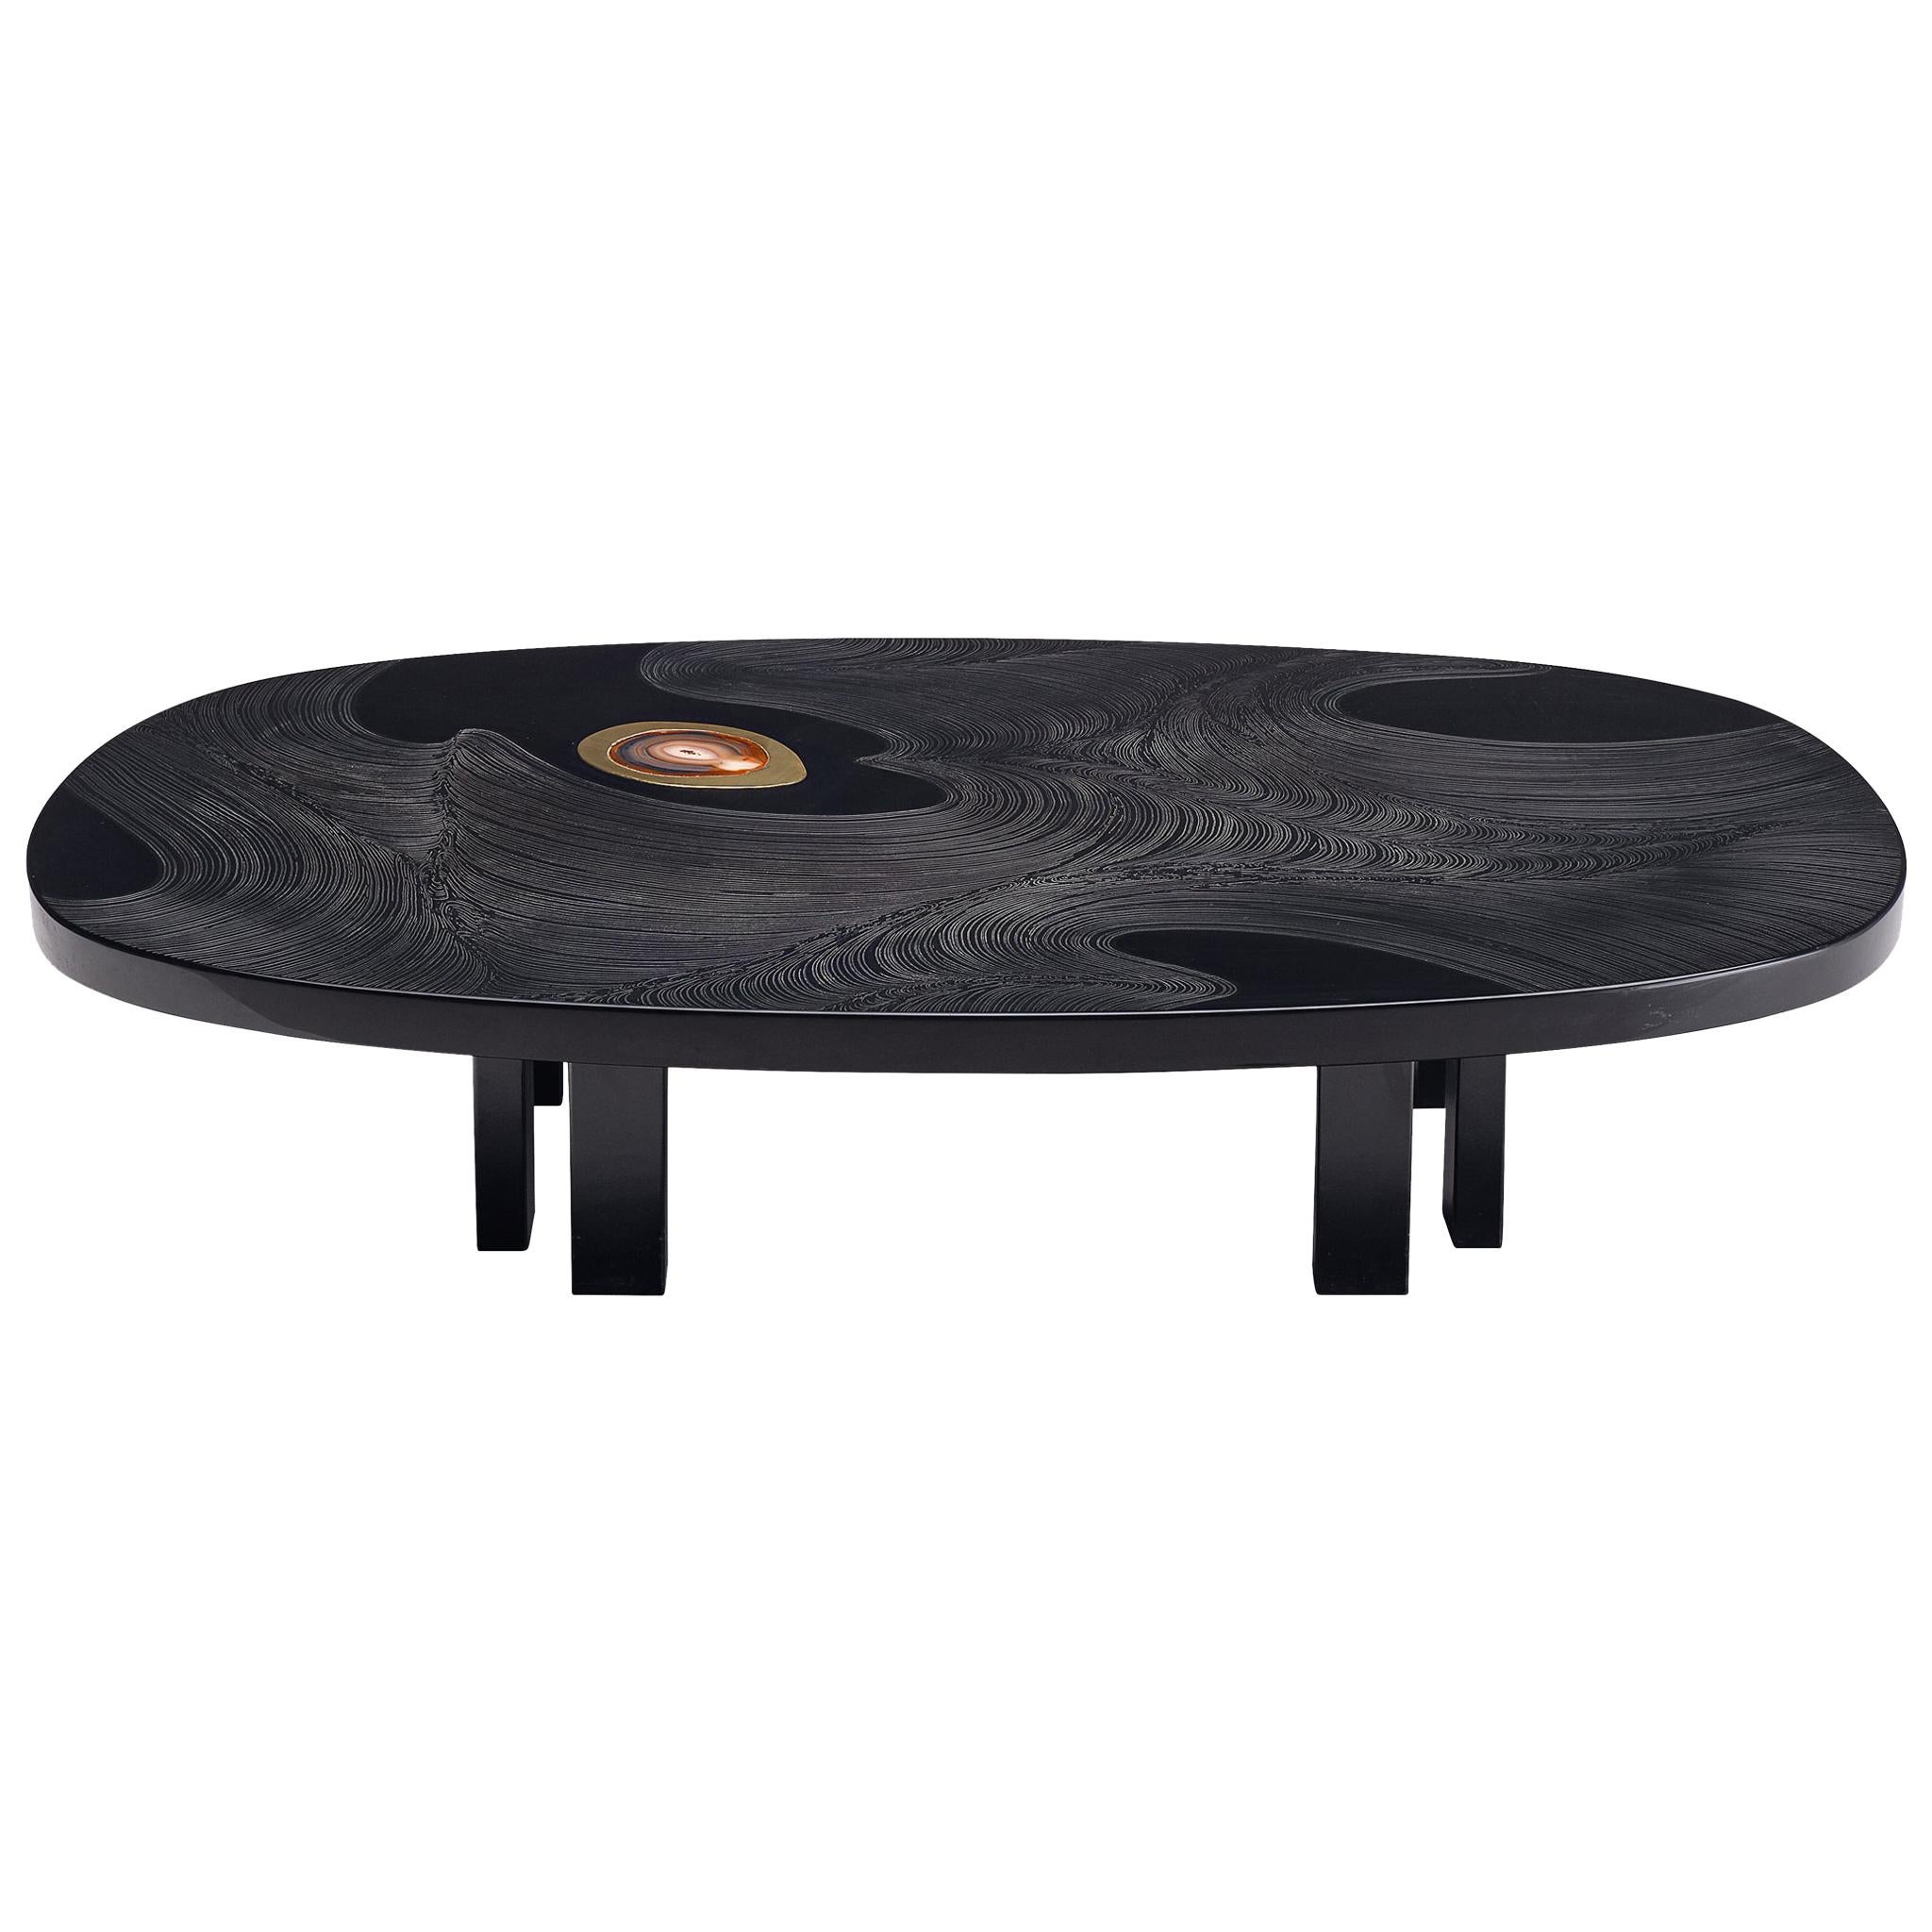 Jean Claude Dresse Coffee Table In Sculpted Black Resin Inlayed with Agate